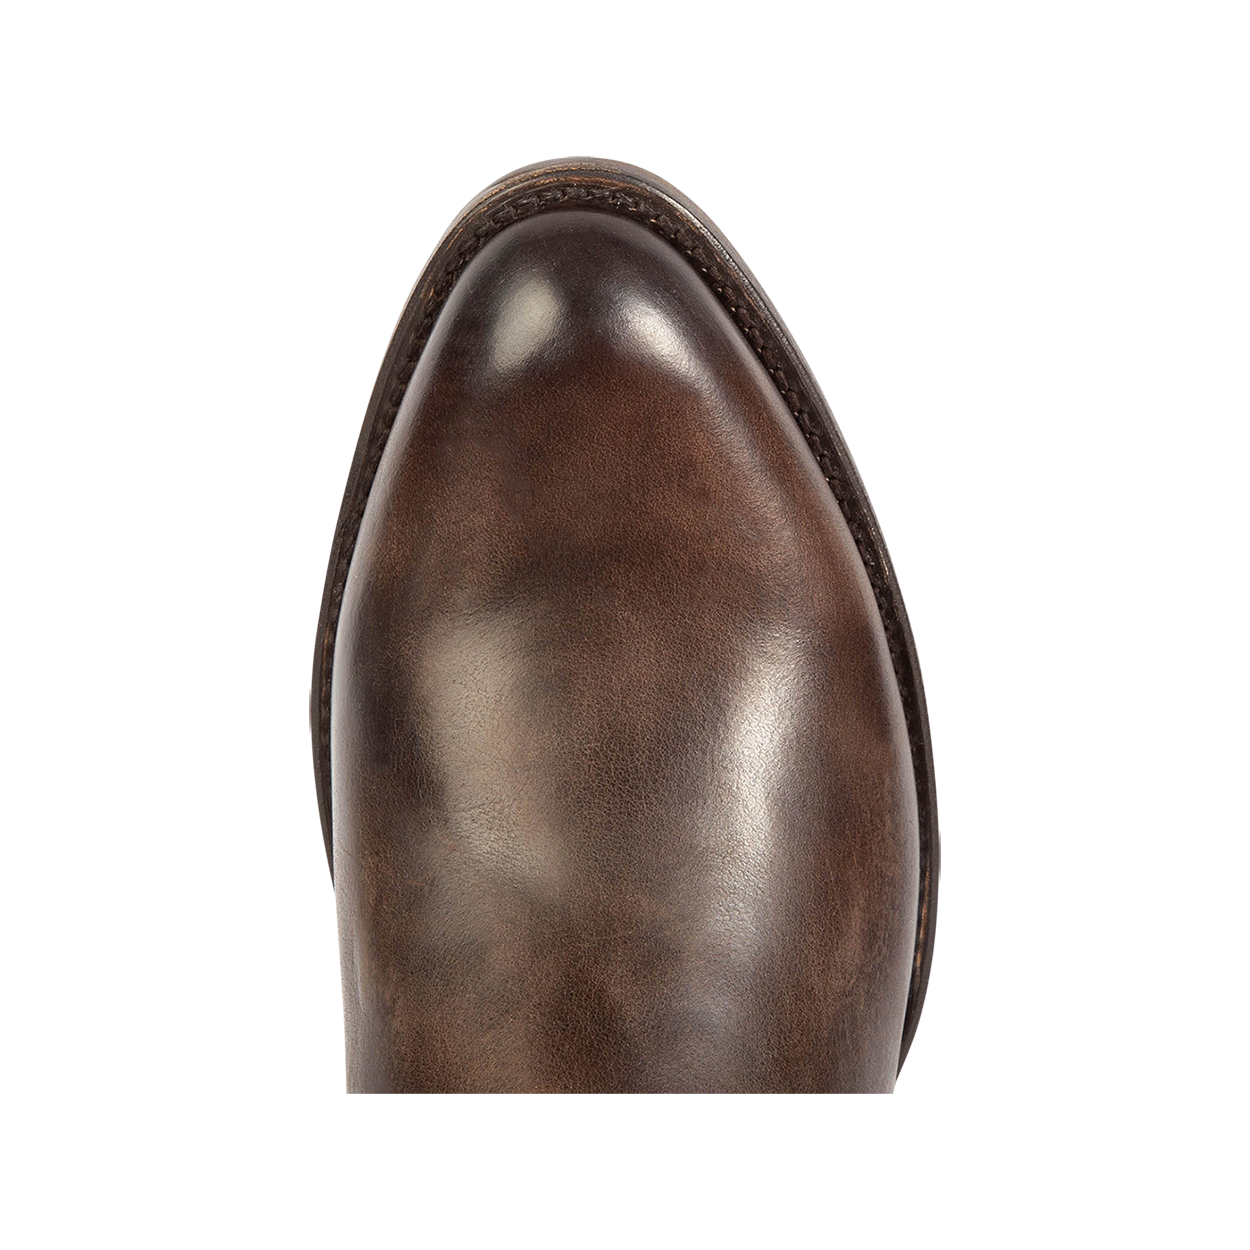 Top view showing traditional toe shape on FREEBIRD men's Outlaw brown distressed boot